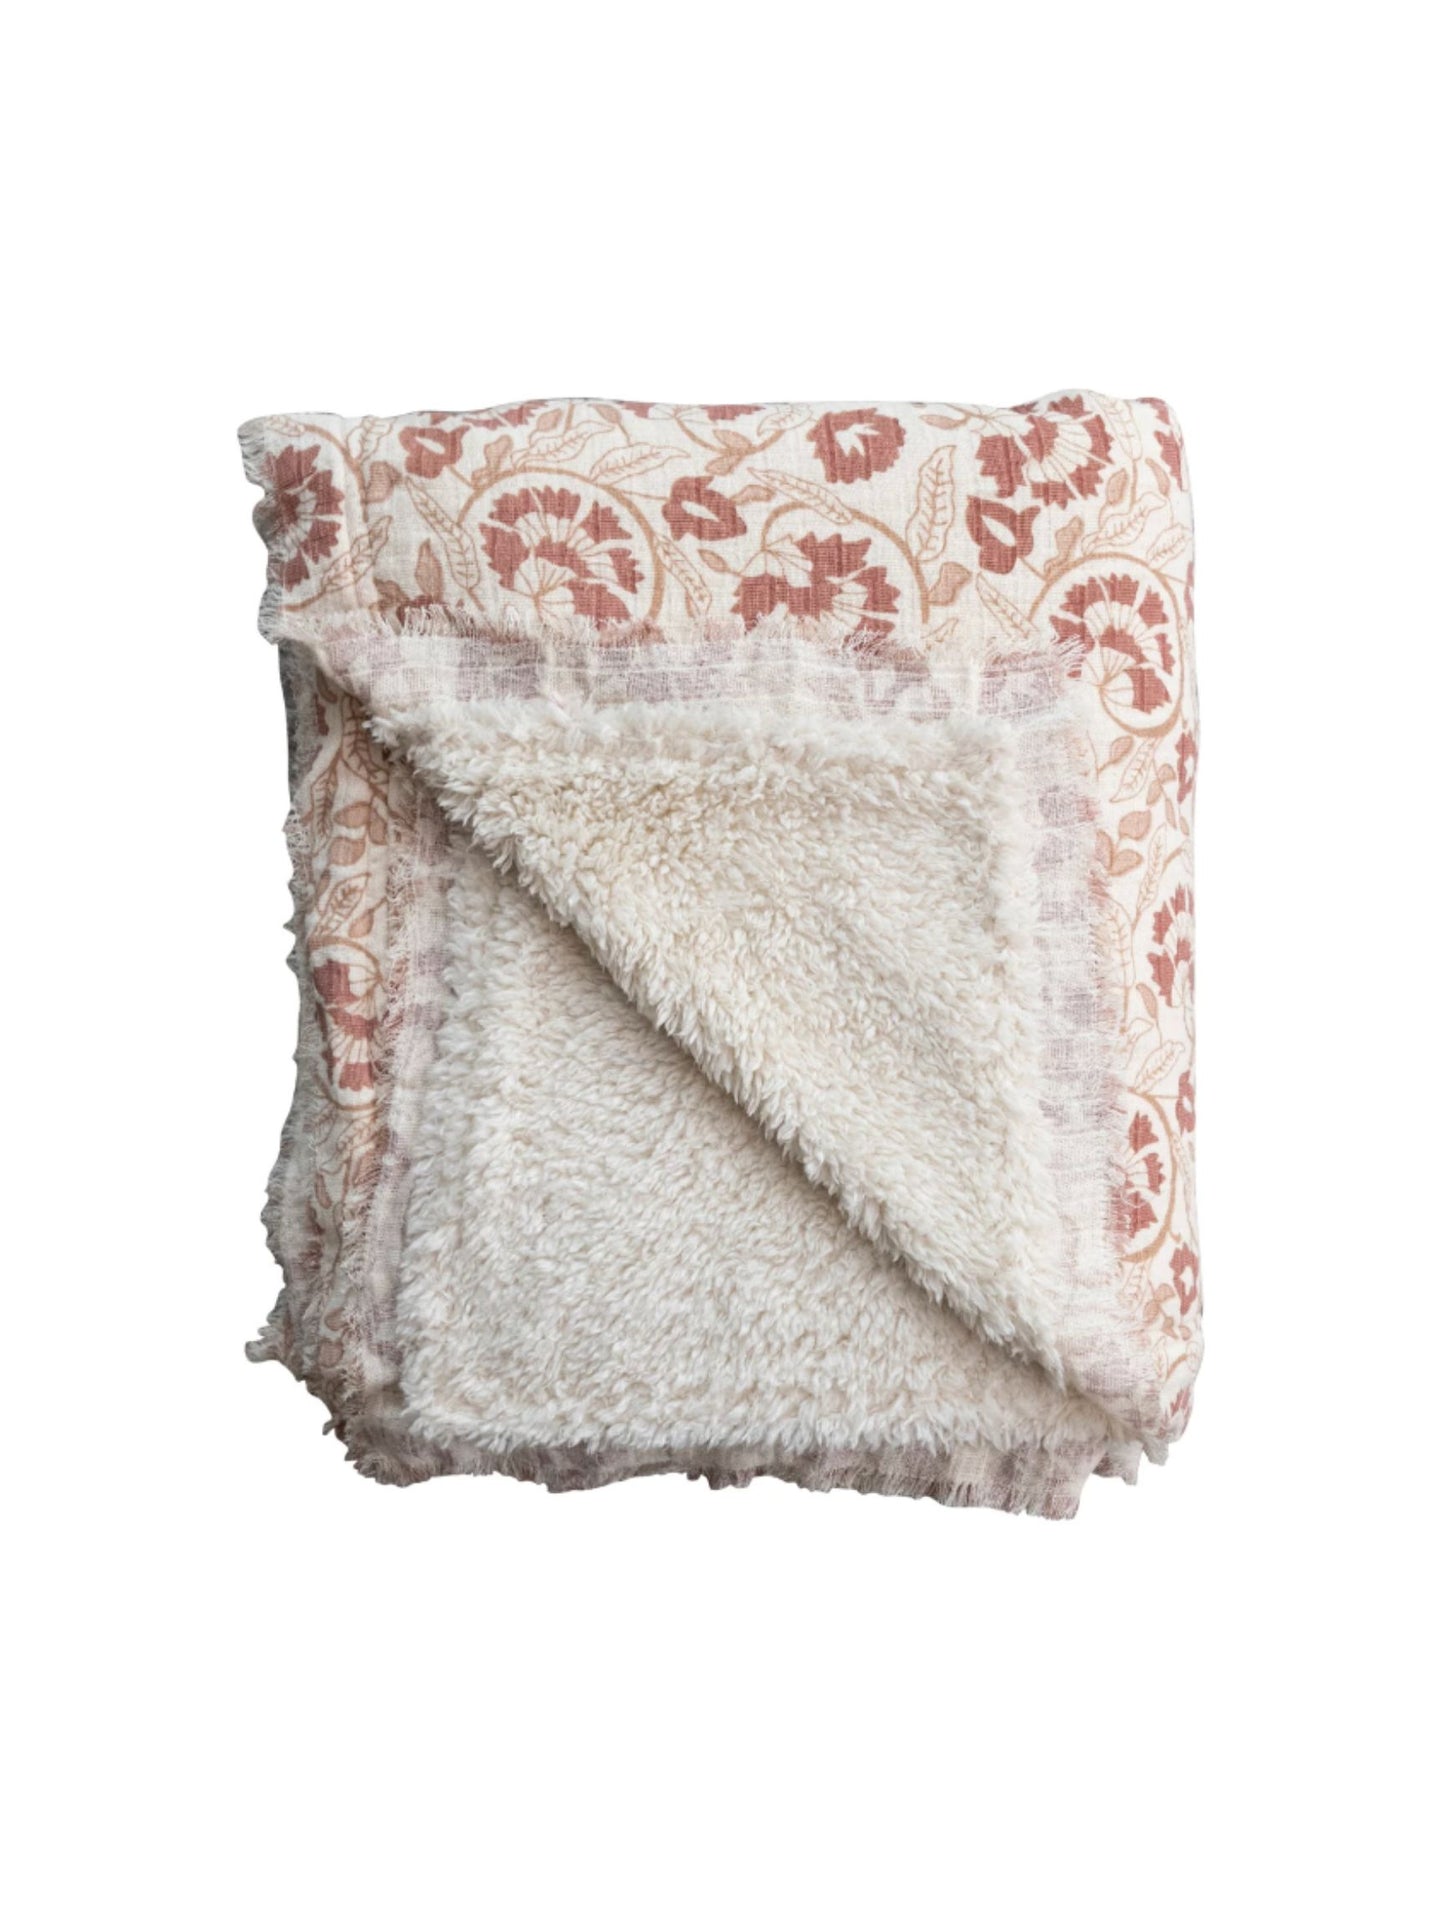 Woven Cotton Printed Throw w/ Sherpa Back - Rose